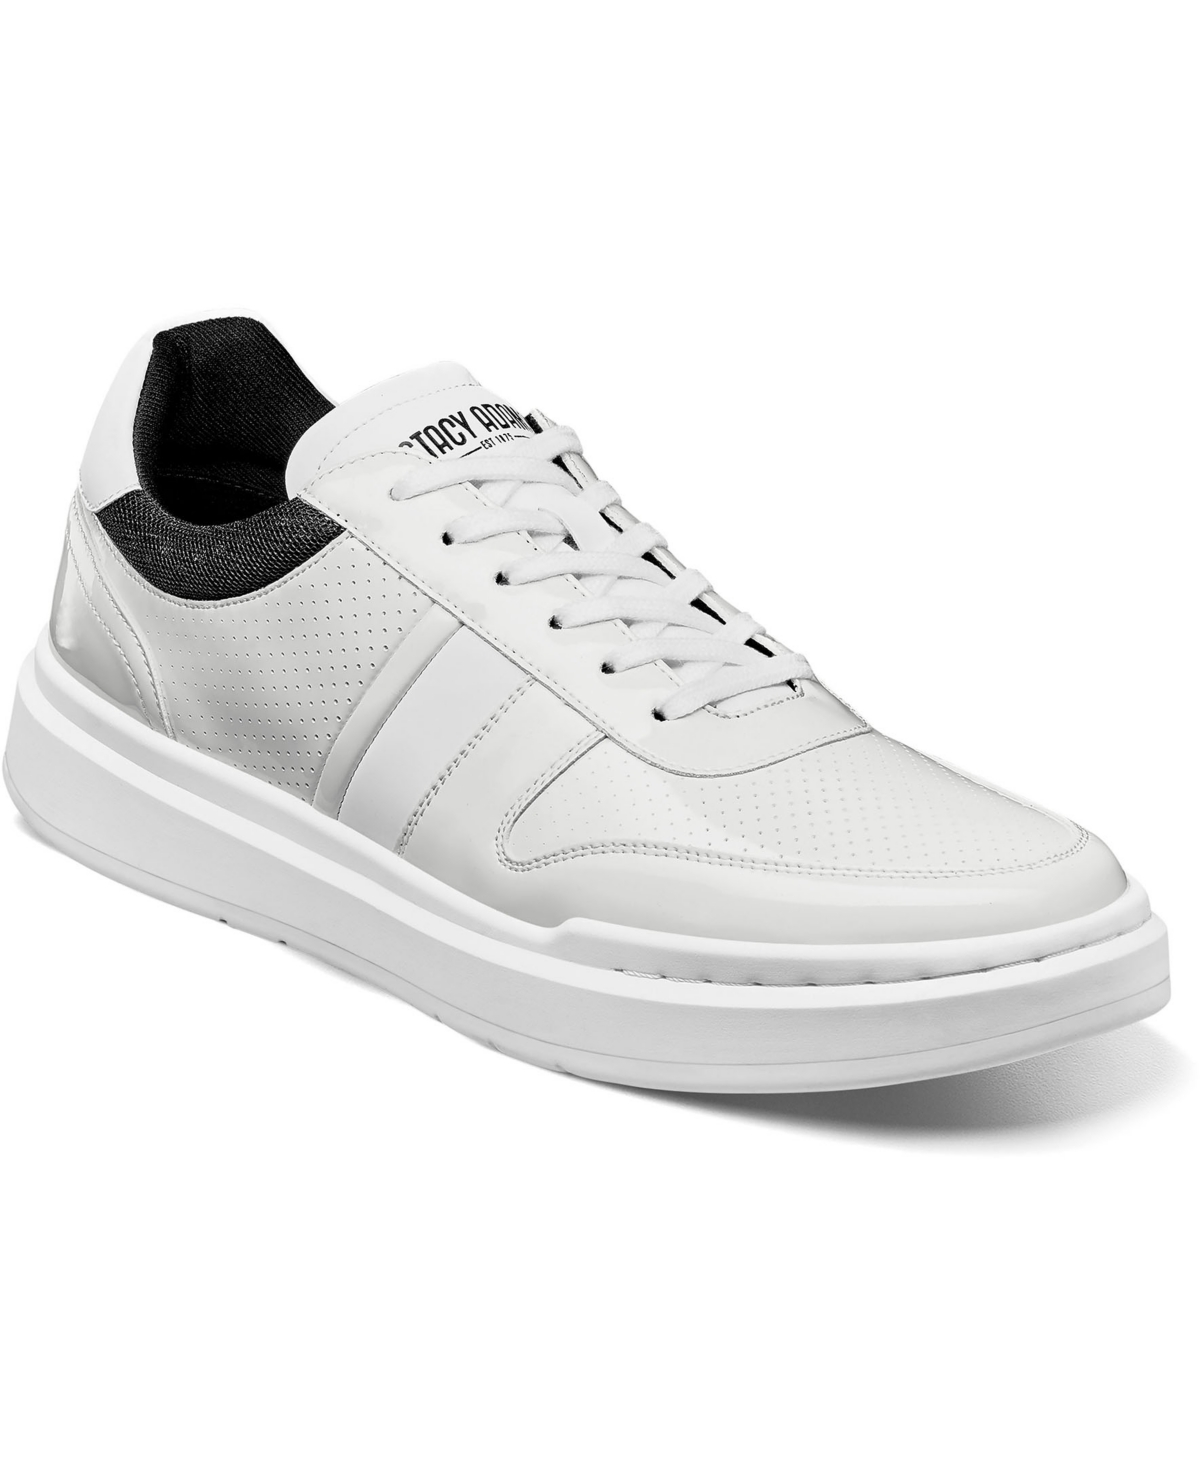 Stacy Adams Men's Cashton Moc Toe Lace Up Sneakers In White Patent